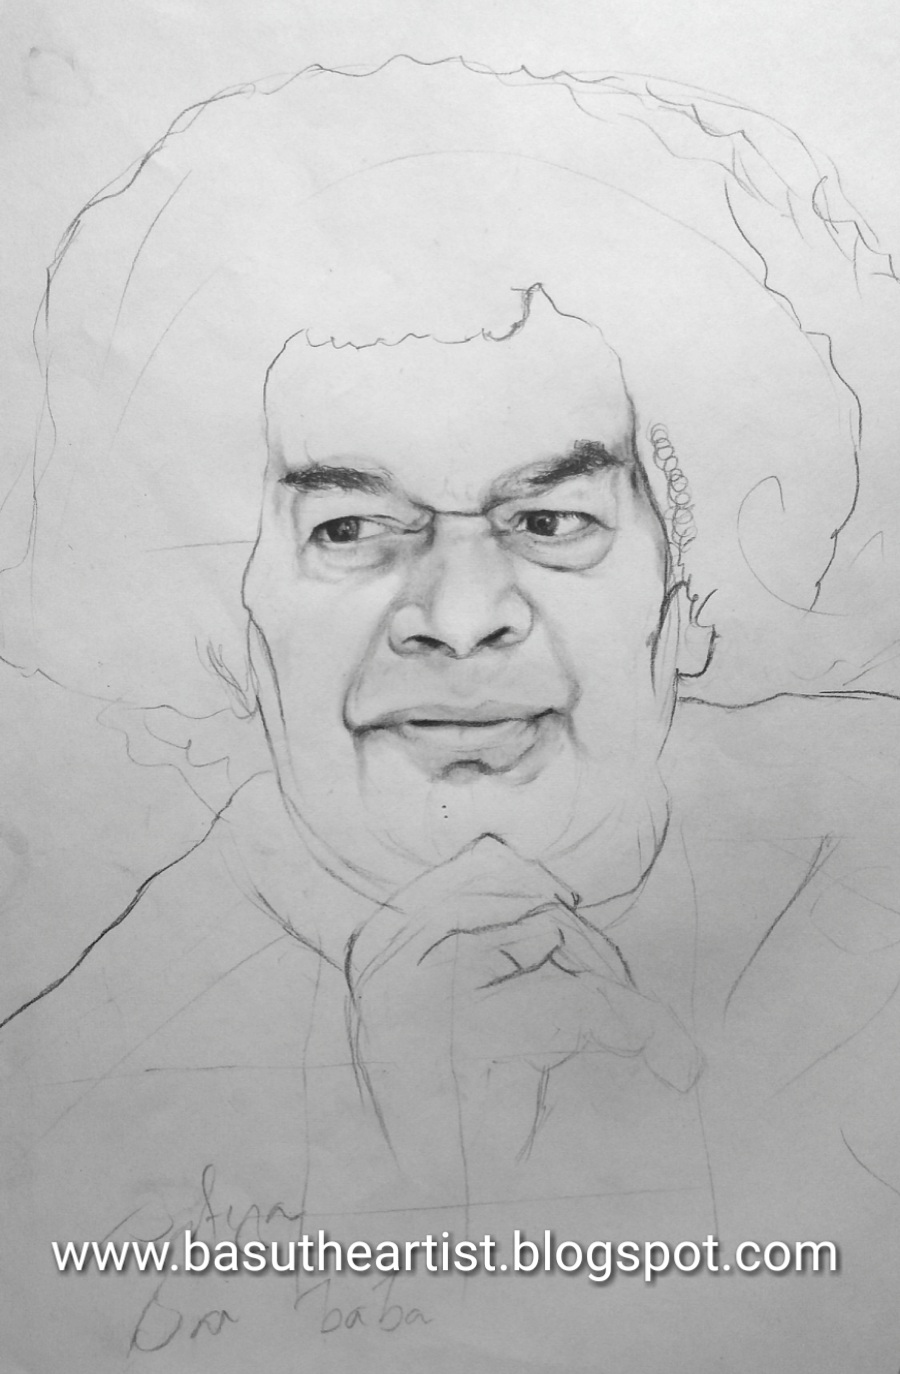 Discover 174+ sai baba sketch painting latest